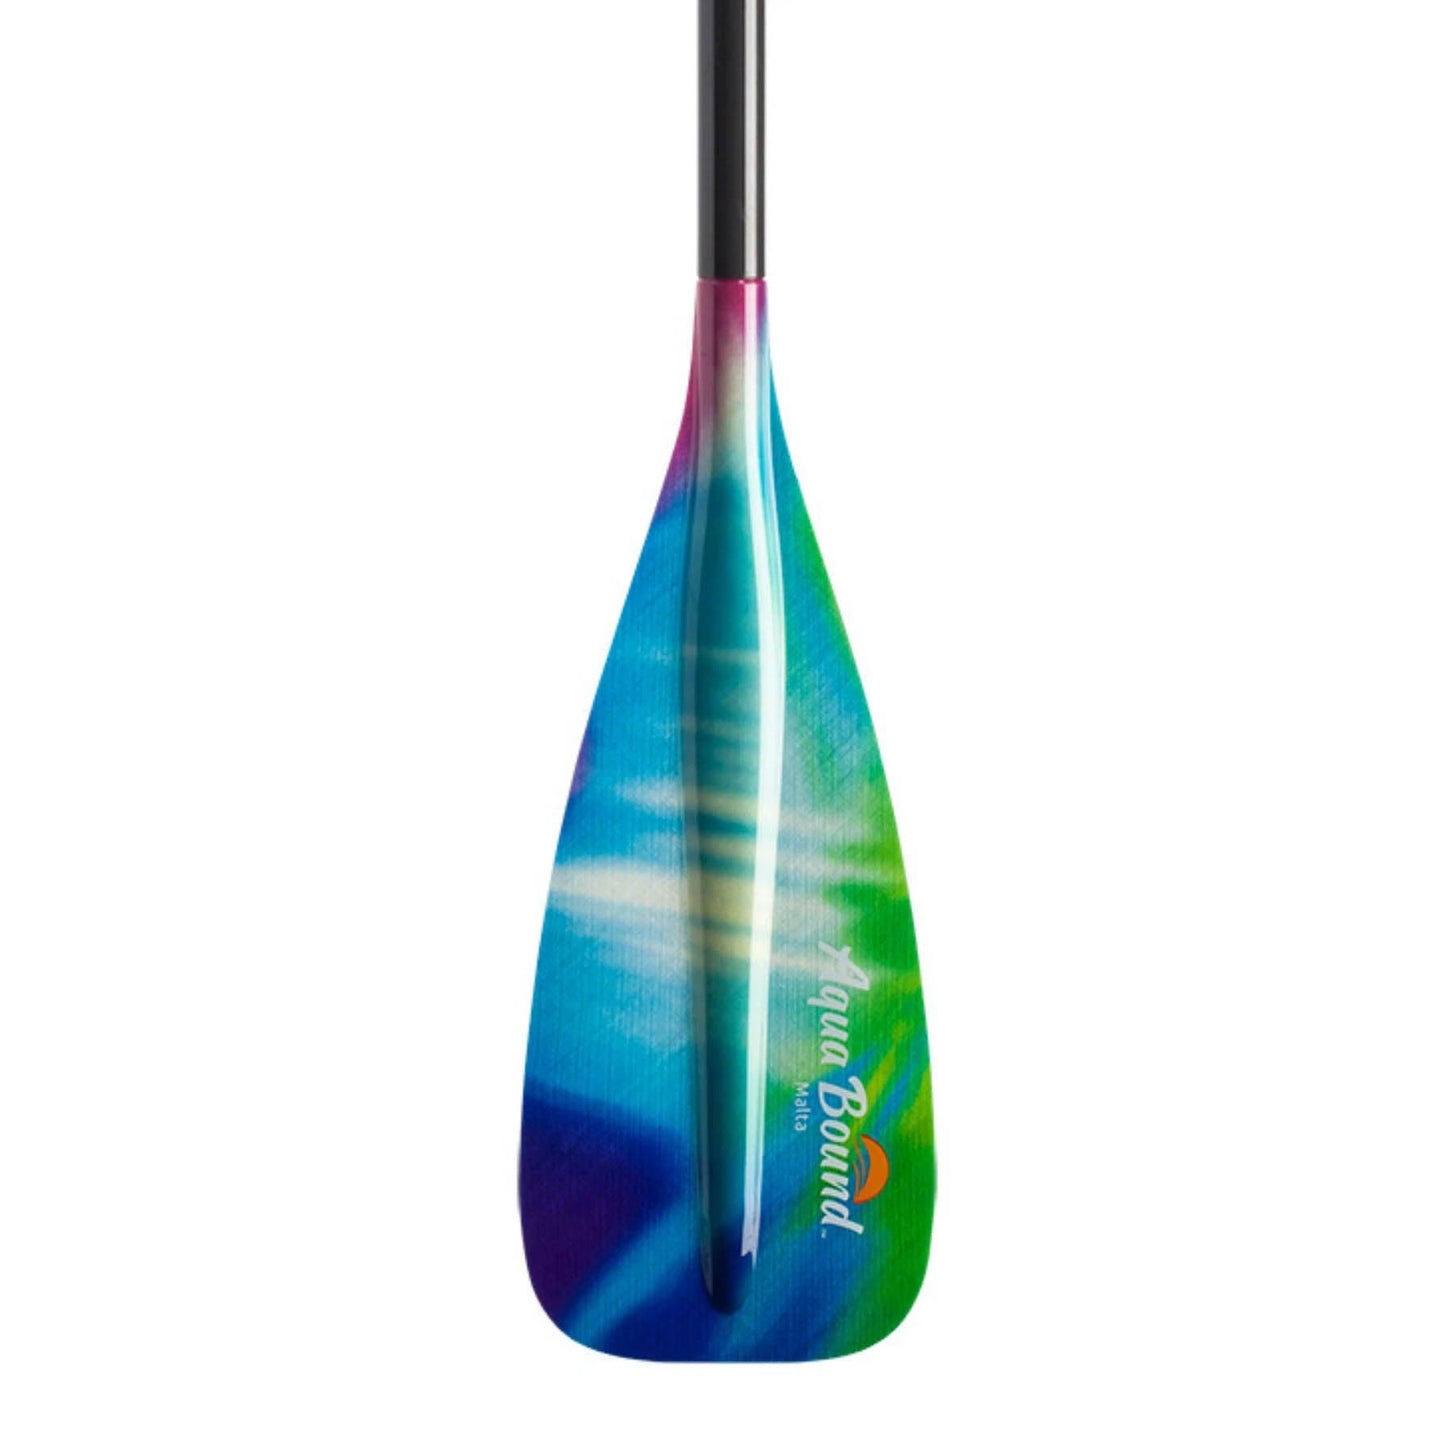 Featuring the Malta SUP Paddle 2-piece sup paddle manufactured by AquaBound shown here from a sixth angle.